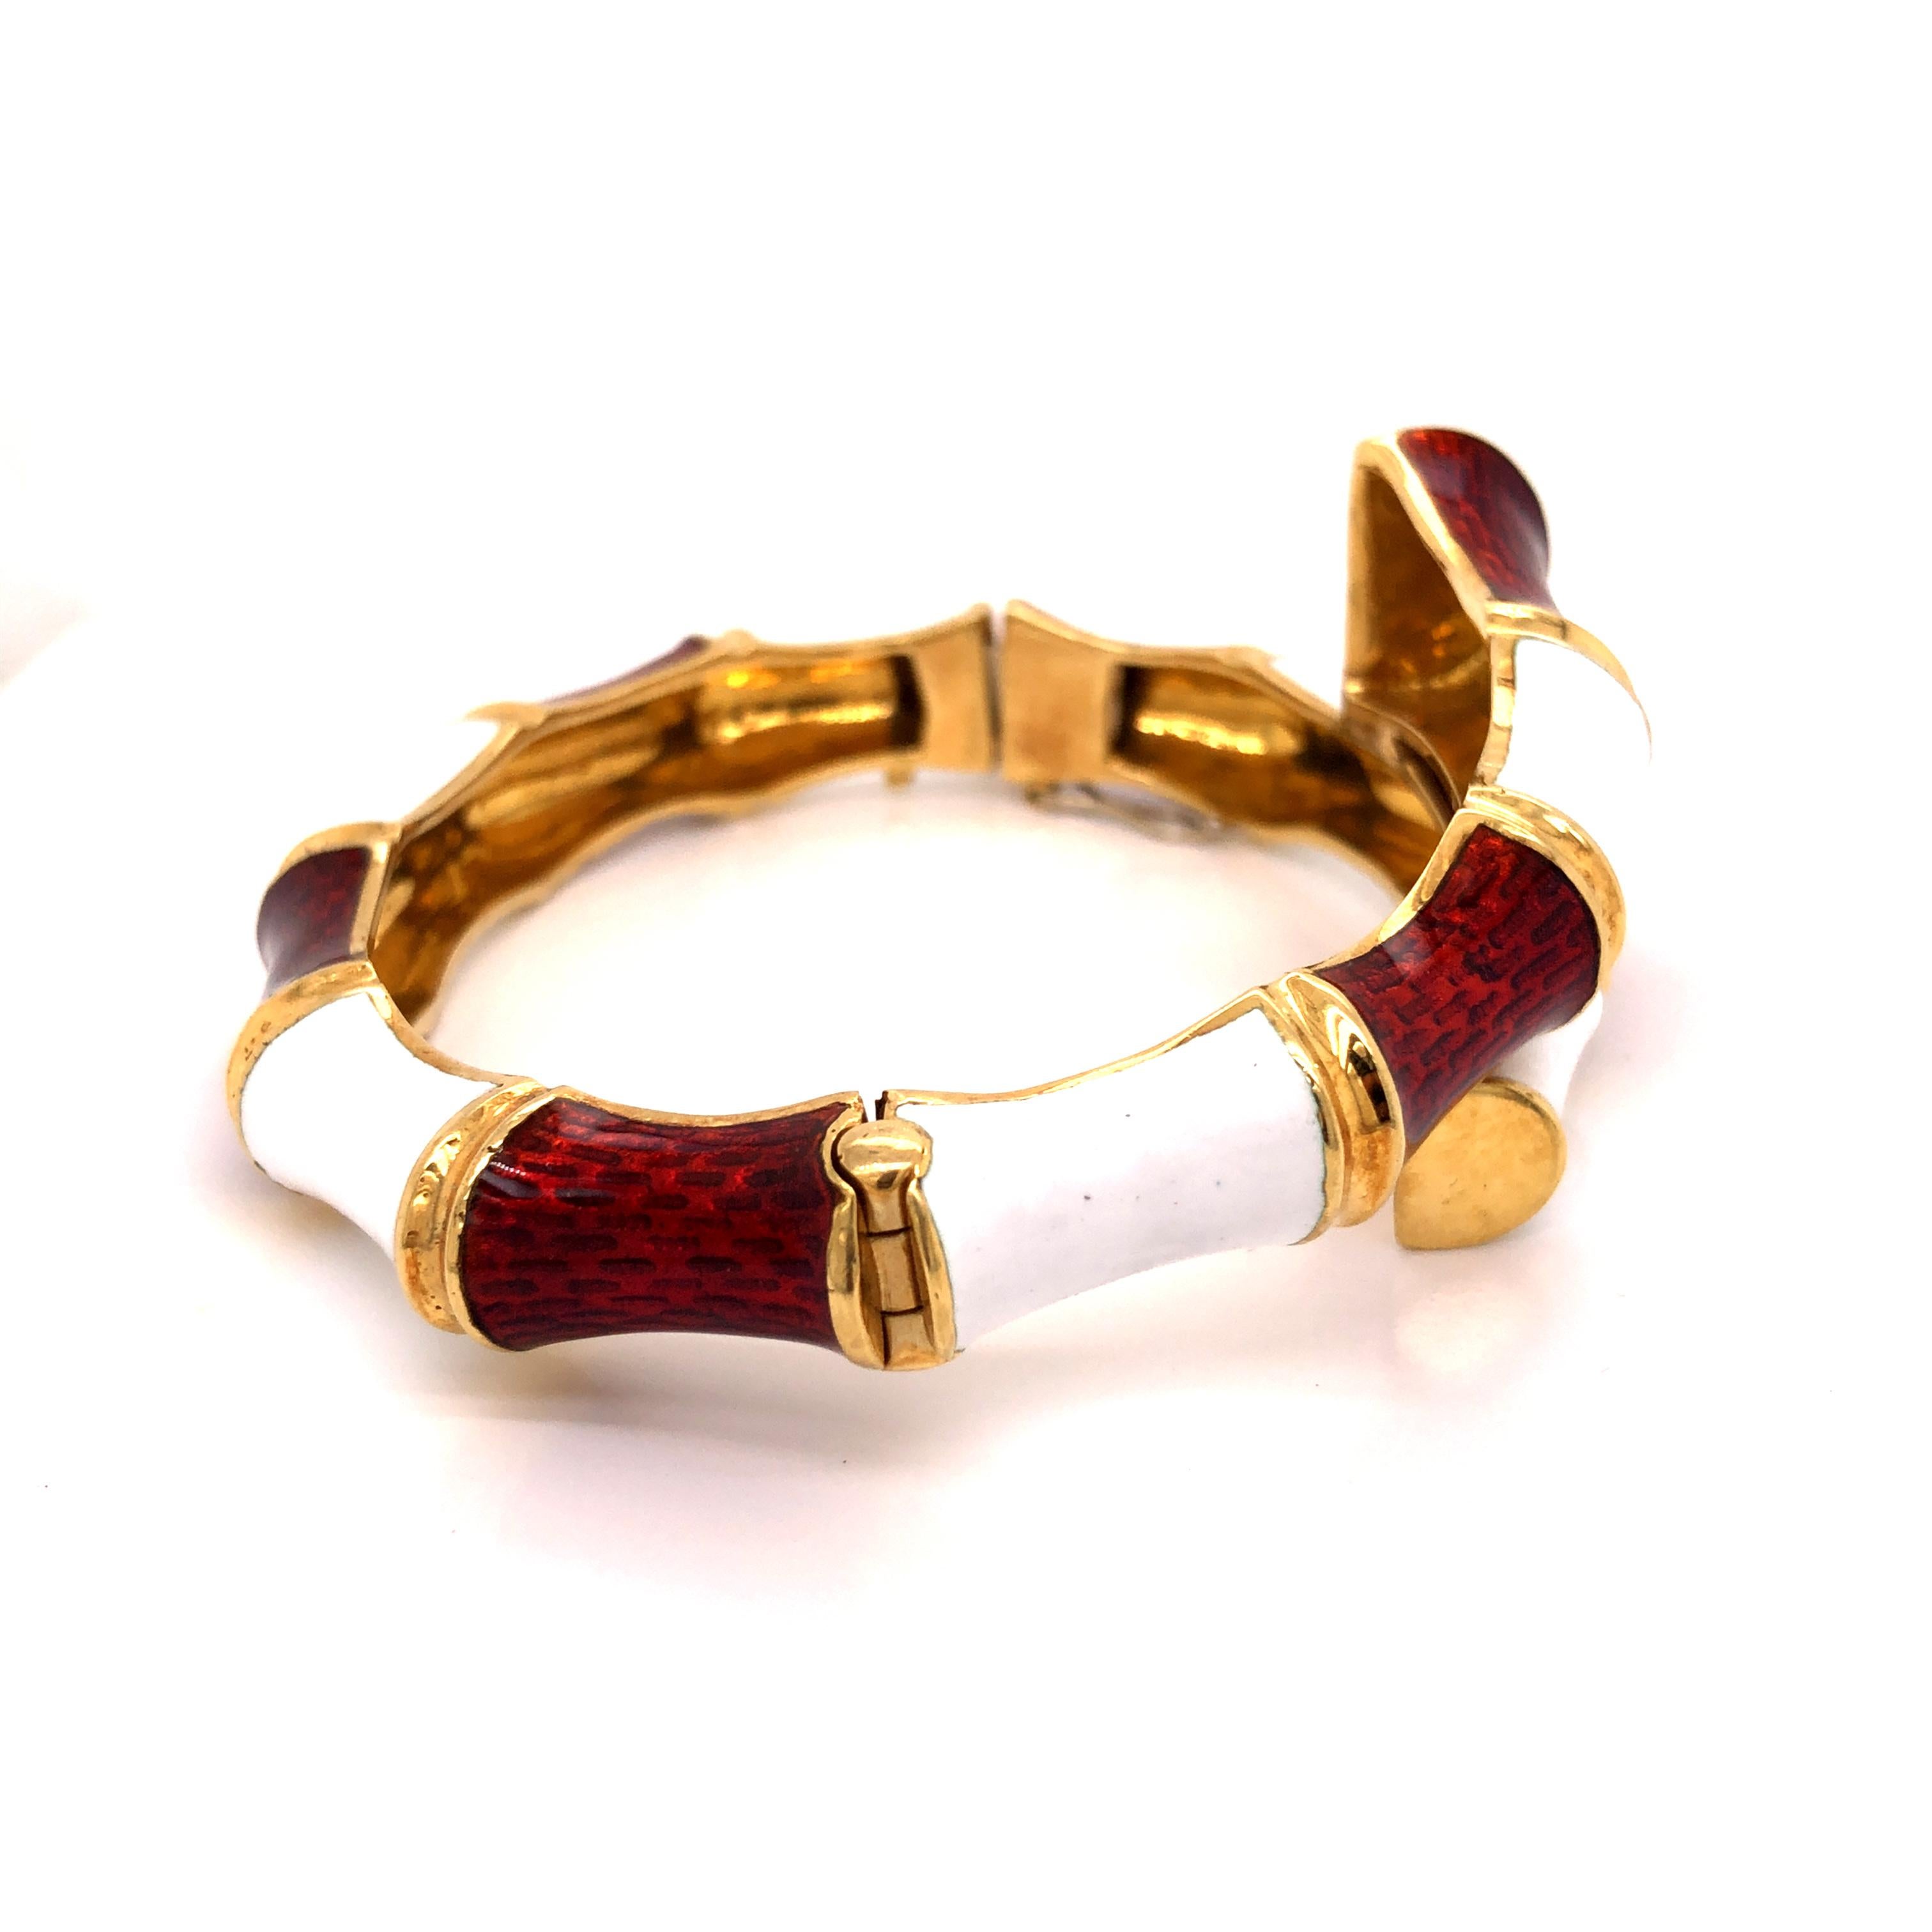 A cool vintage white and red enamel bamboo bangle bracelet. 
18K Yellow Gold

Inside Measurement: 2 3/8